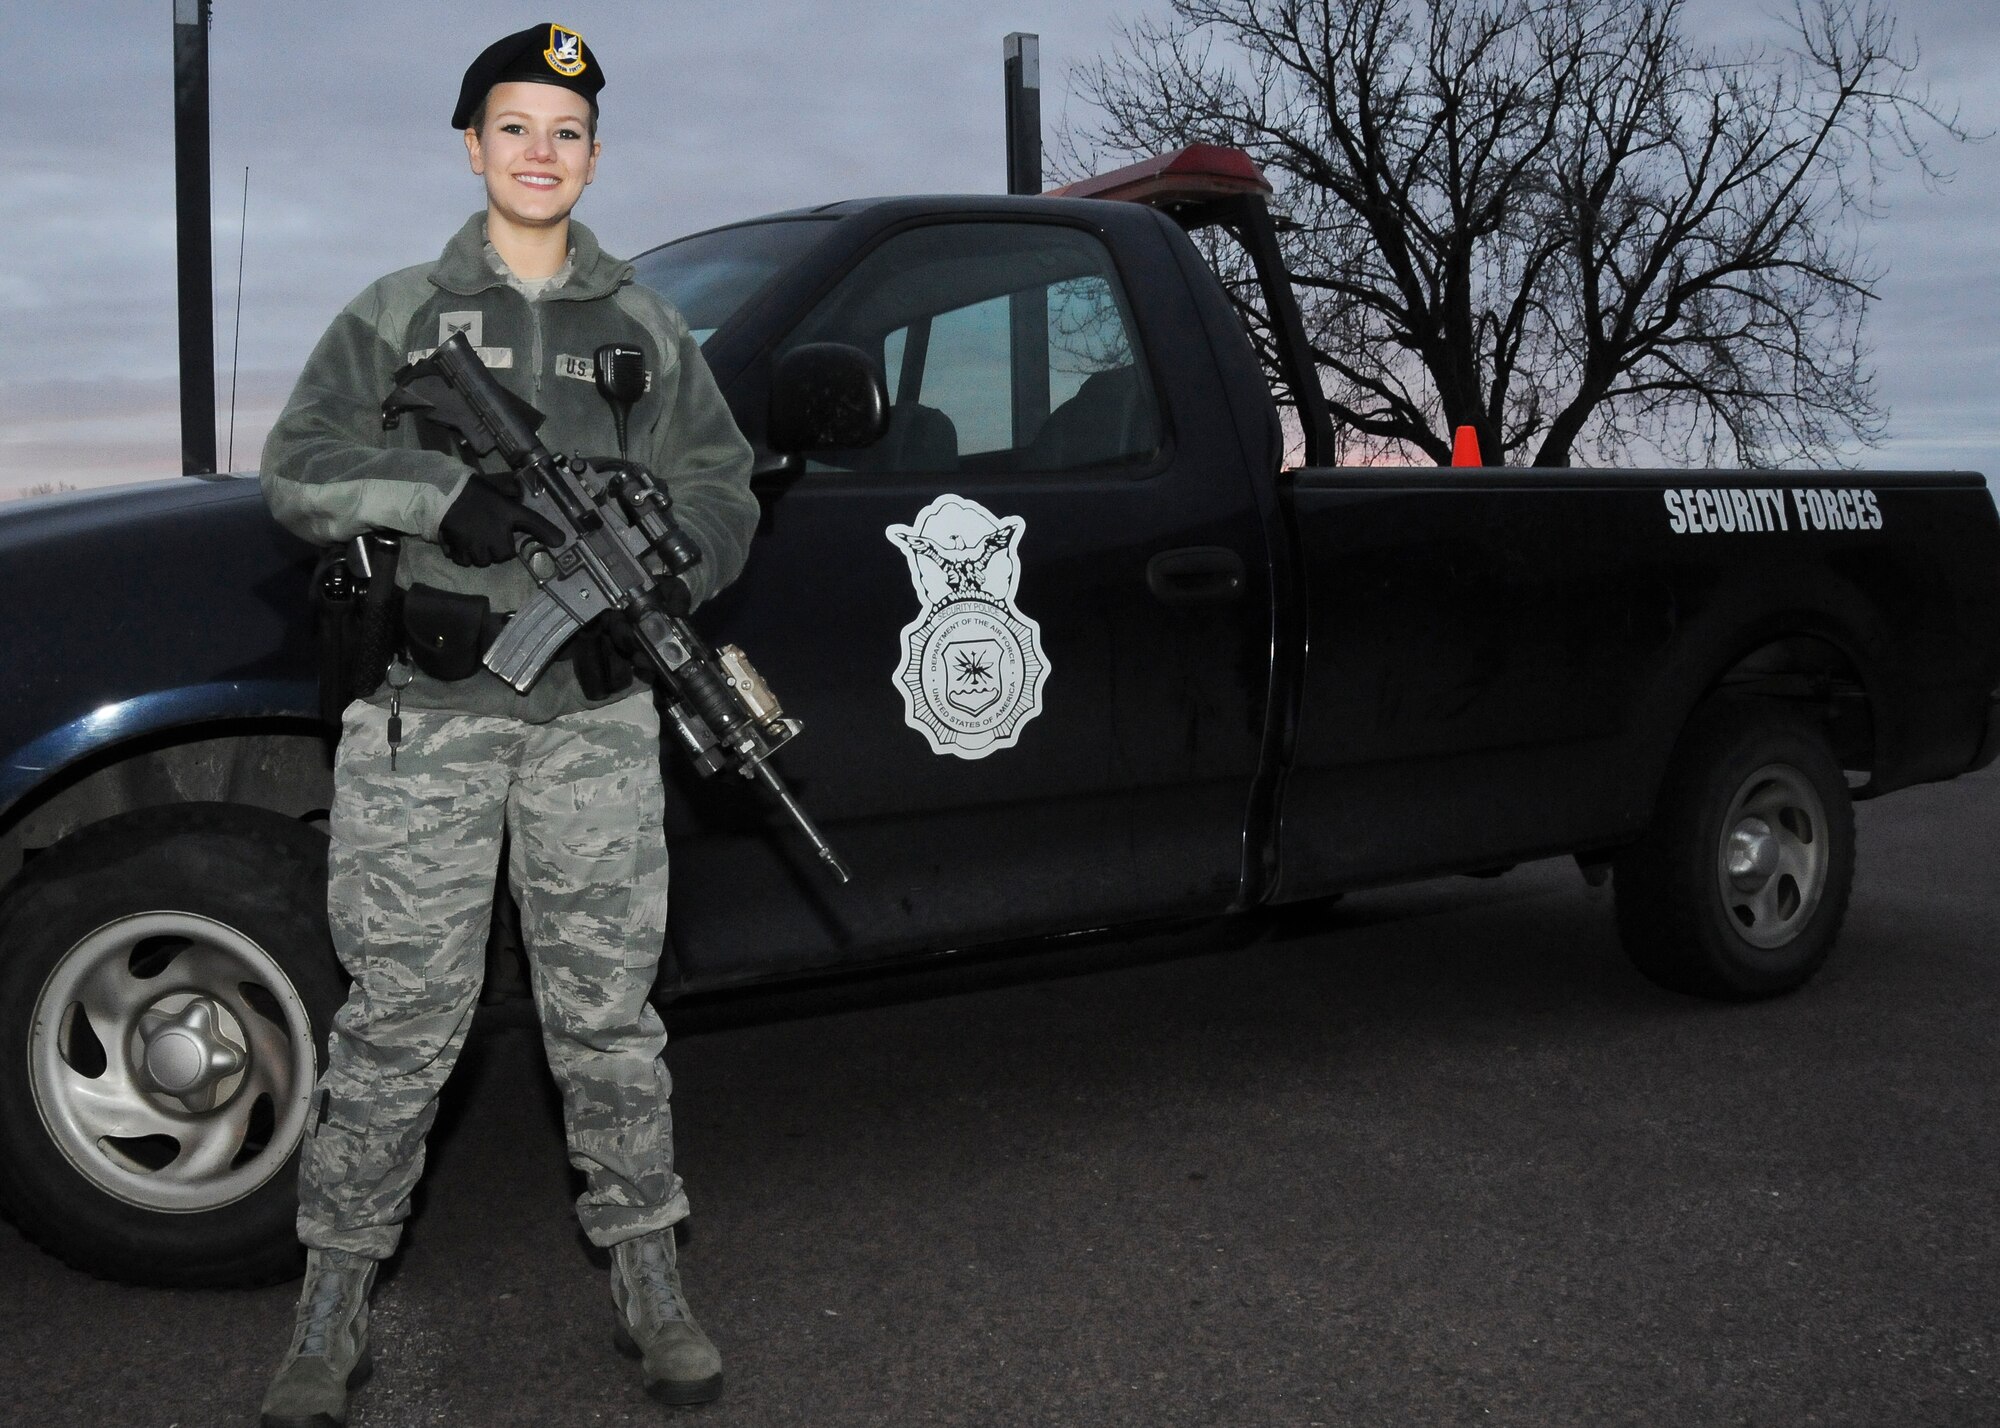 Senior Airman Jorrie Hart, 114th Security Forces Squadron installation controller, poses next to her patrol vehicle during an evening shift at Joe Foss Field, S.D., Feb. 24, 2015. While on patrol, Hart watches over 114th Fighter Wing assets and checks the entire base for any unsecure areas or discrepancies that may need to be reported to the base defense operations center.(National Guard photo by Staff Sgt. Luke Olson/Released)